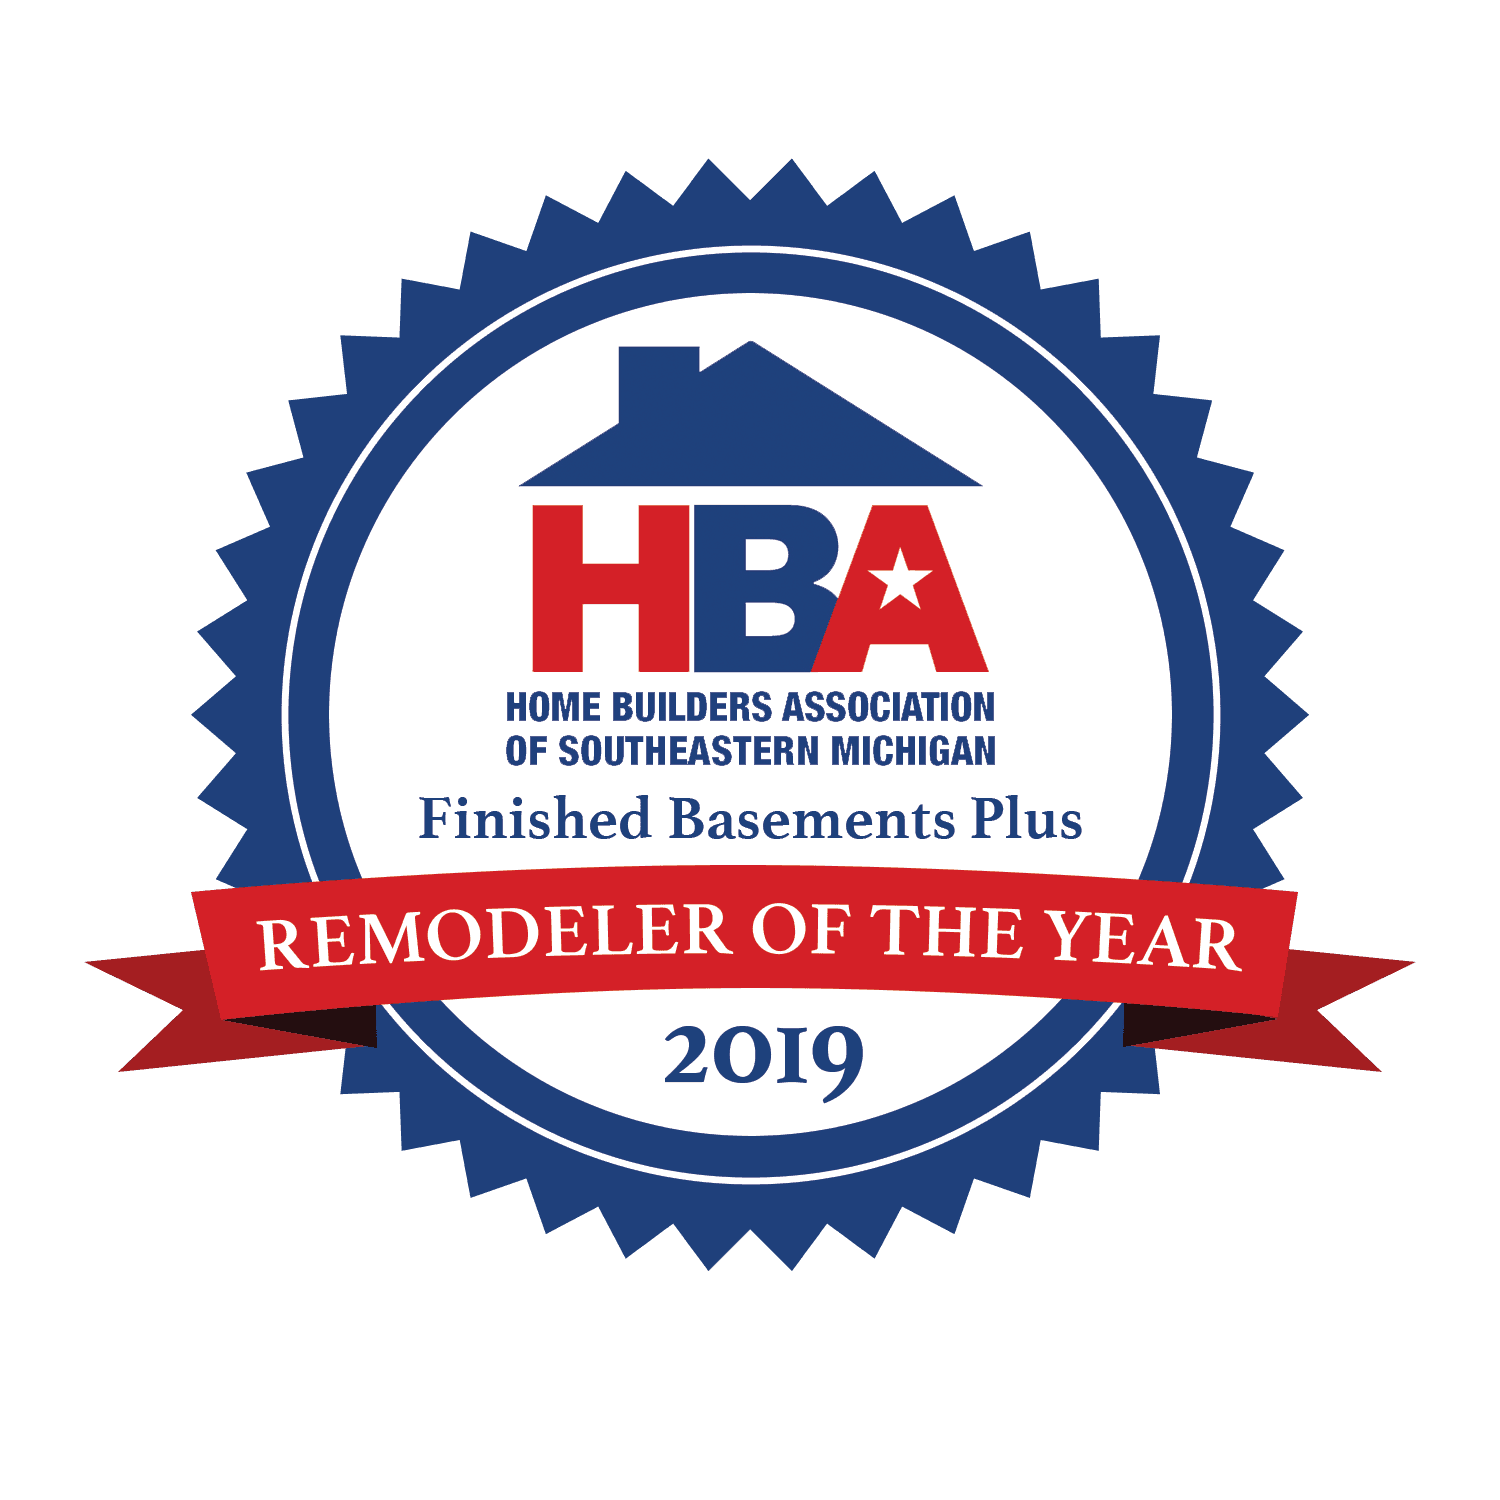 remodeler of the year 2019 home builders association of southeastern michigan